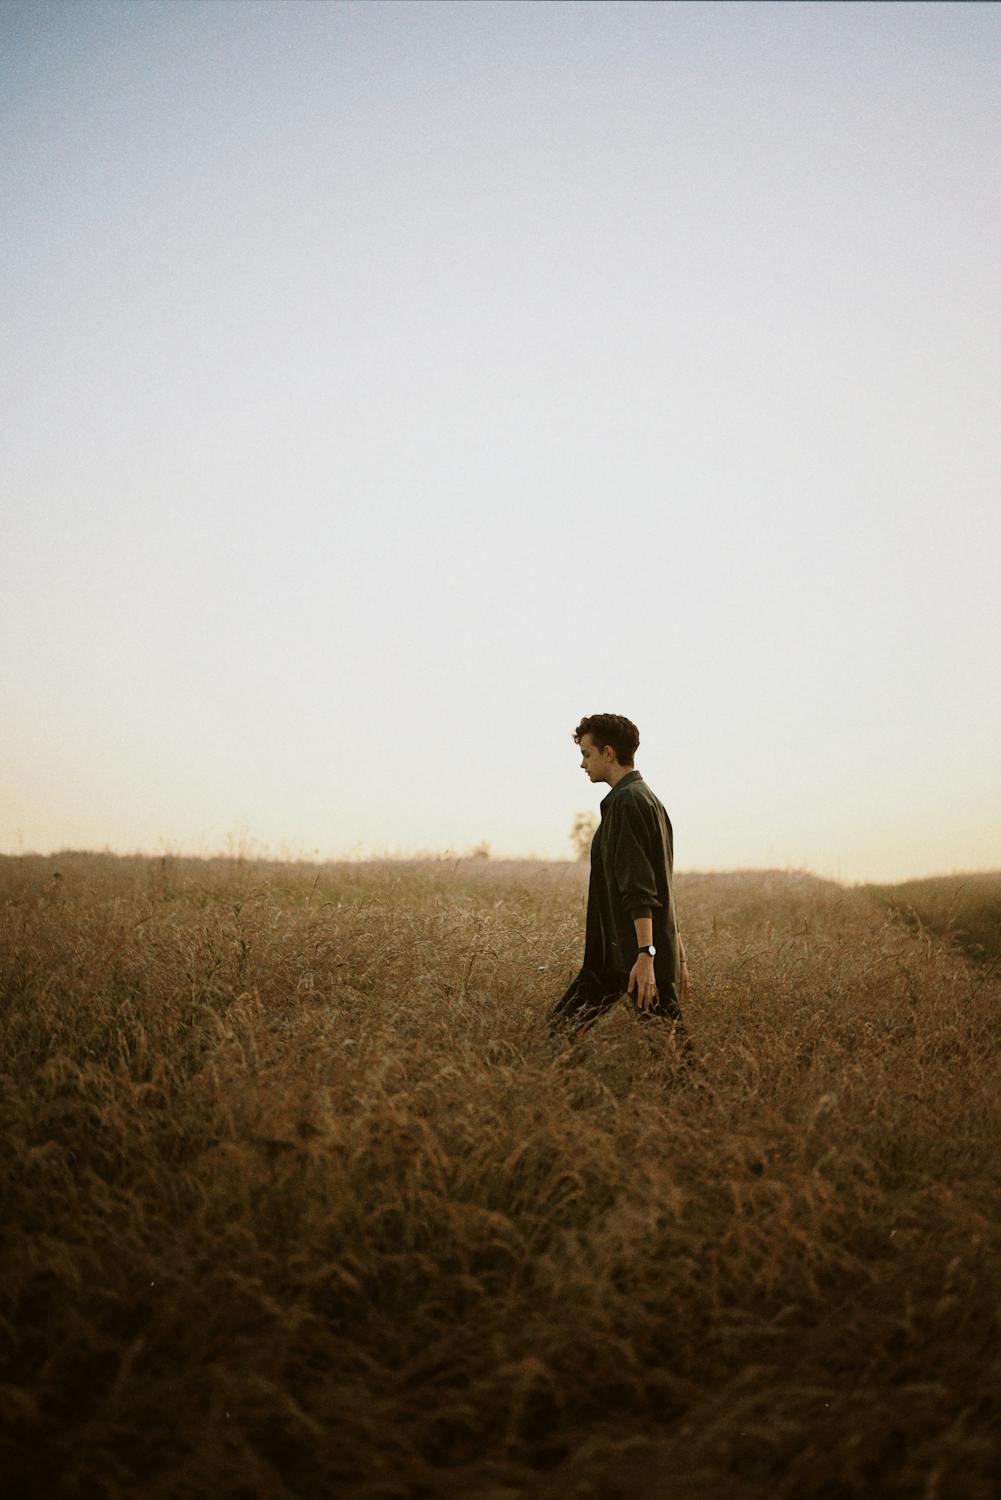 A Man in Black Long Sleeve Standing on Brown Grass Field · Free Stock Photo